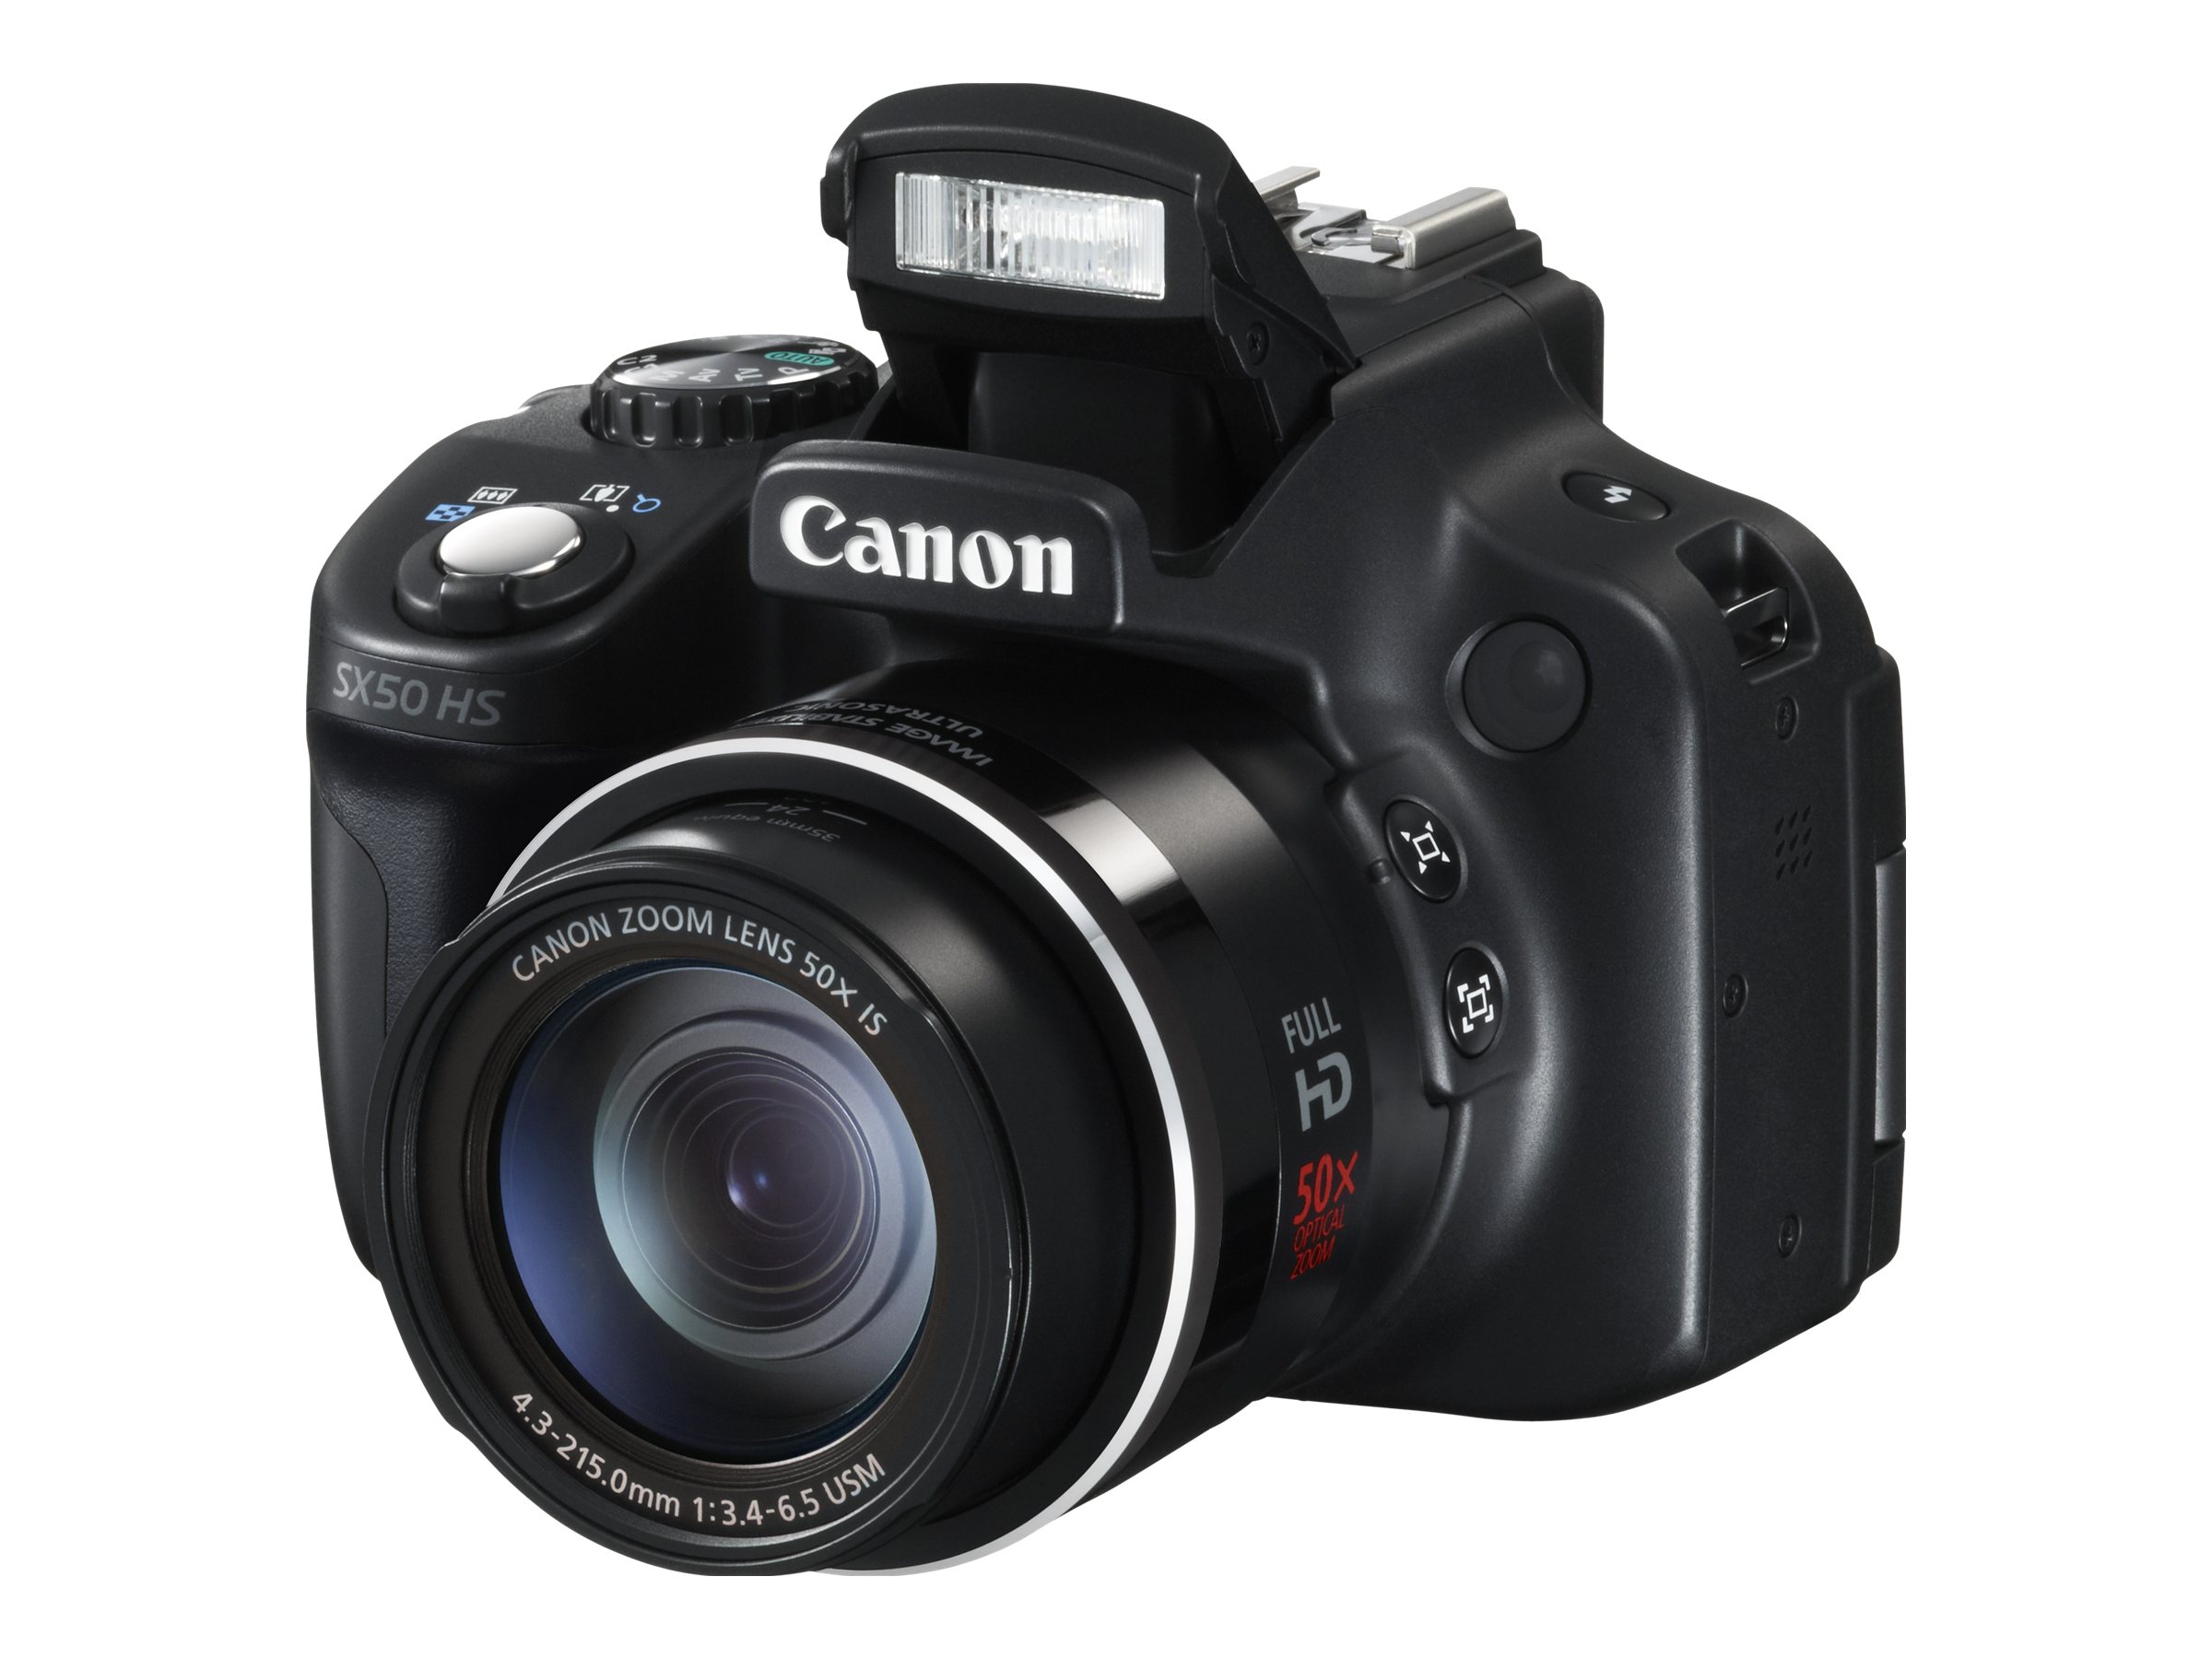 Canon PowerShot SX50 HS - Digital camera - compact - 12.1 MP - 1080p - 50x optical zoom - image 3 of 15